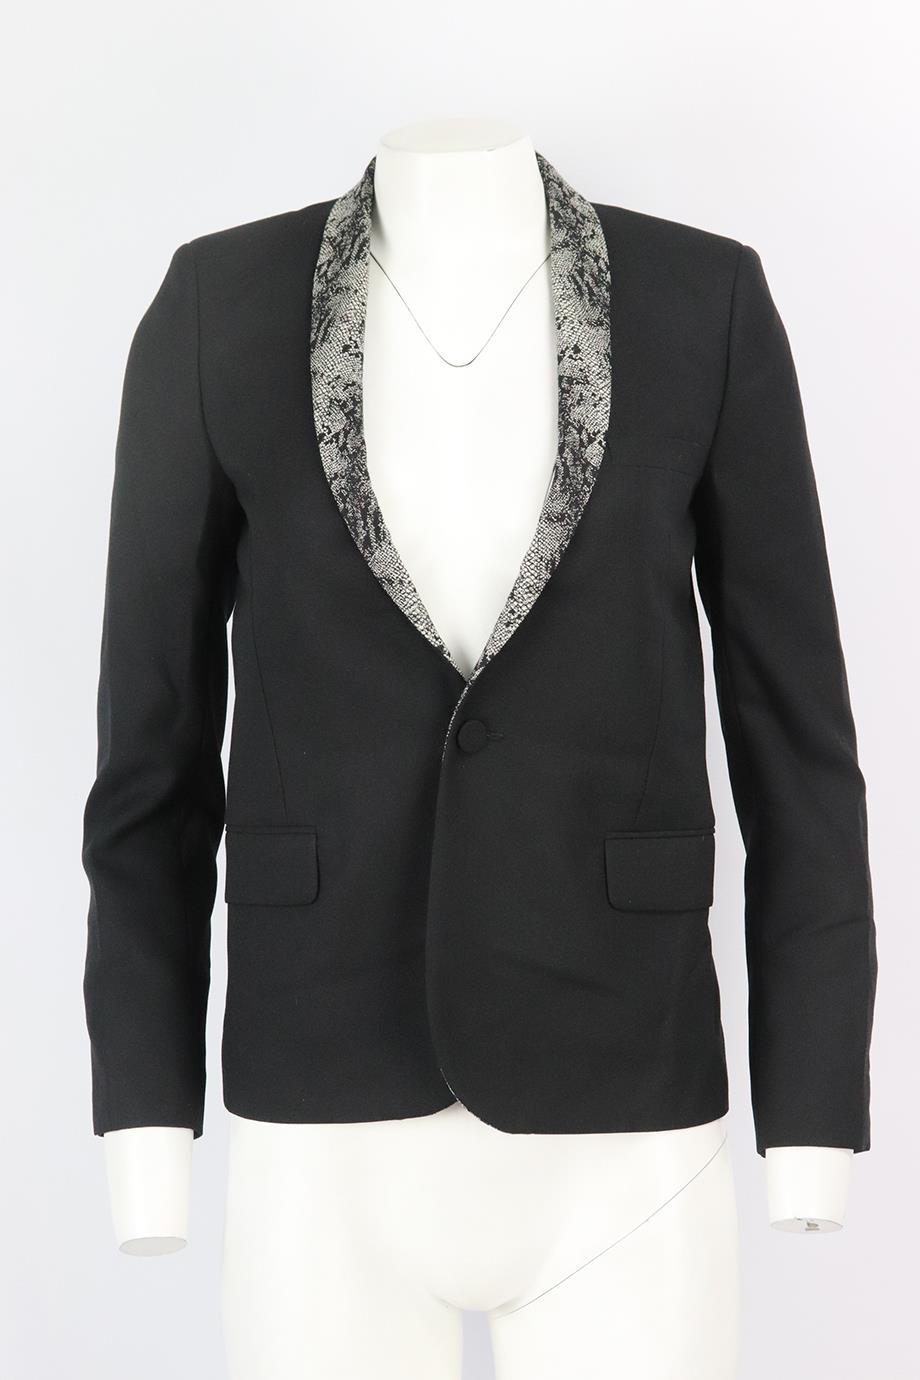 Saint Laurent snake jacquard trimmed wool blazer. Black. Long sleeve, v-neck. Button fastening at front. 100% Wool; fabric2: 100% wool; lining: 100% silk. Size: FR 36 (UK 8, US 4, IT 40). Shoulder to shoulder: 14.75 in. Bust: 35 in. Waist: 33 in.